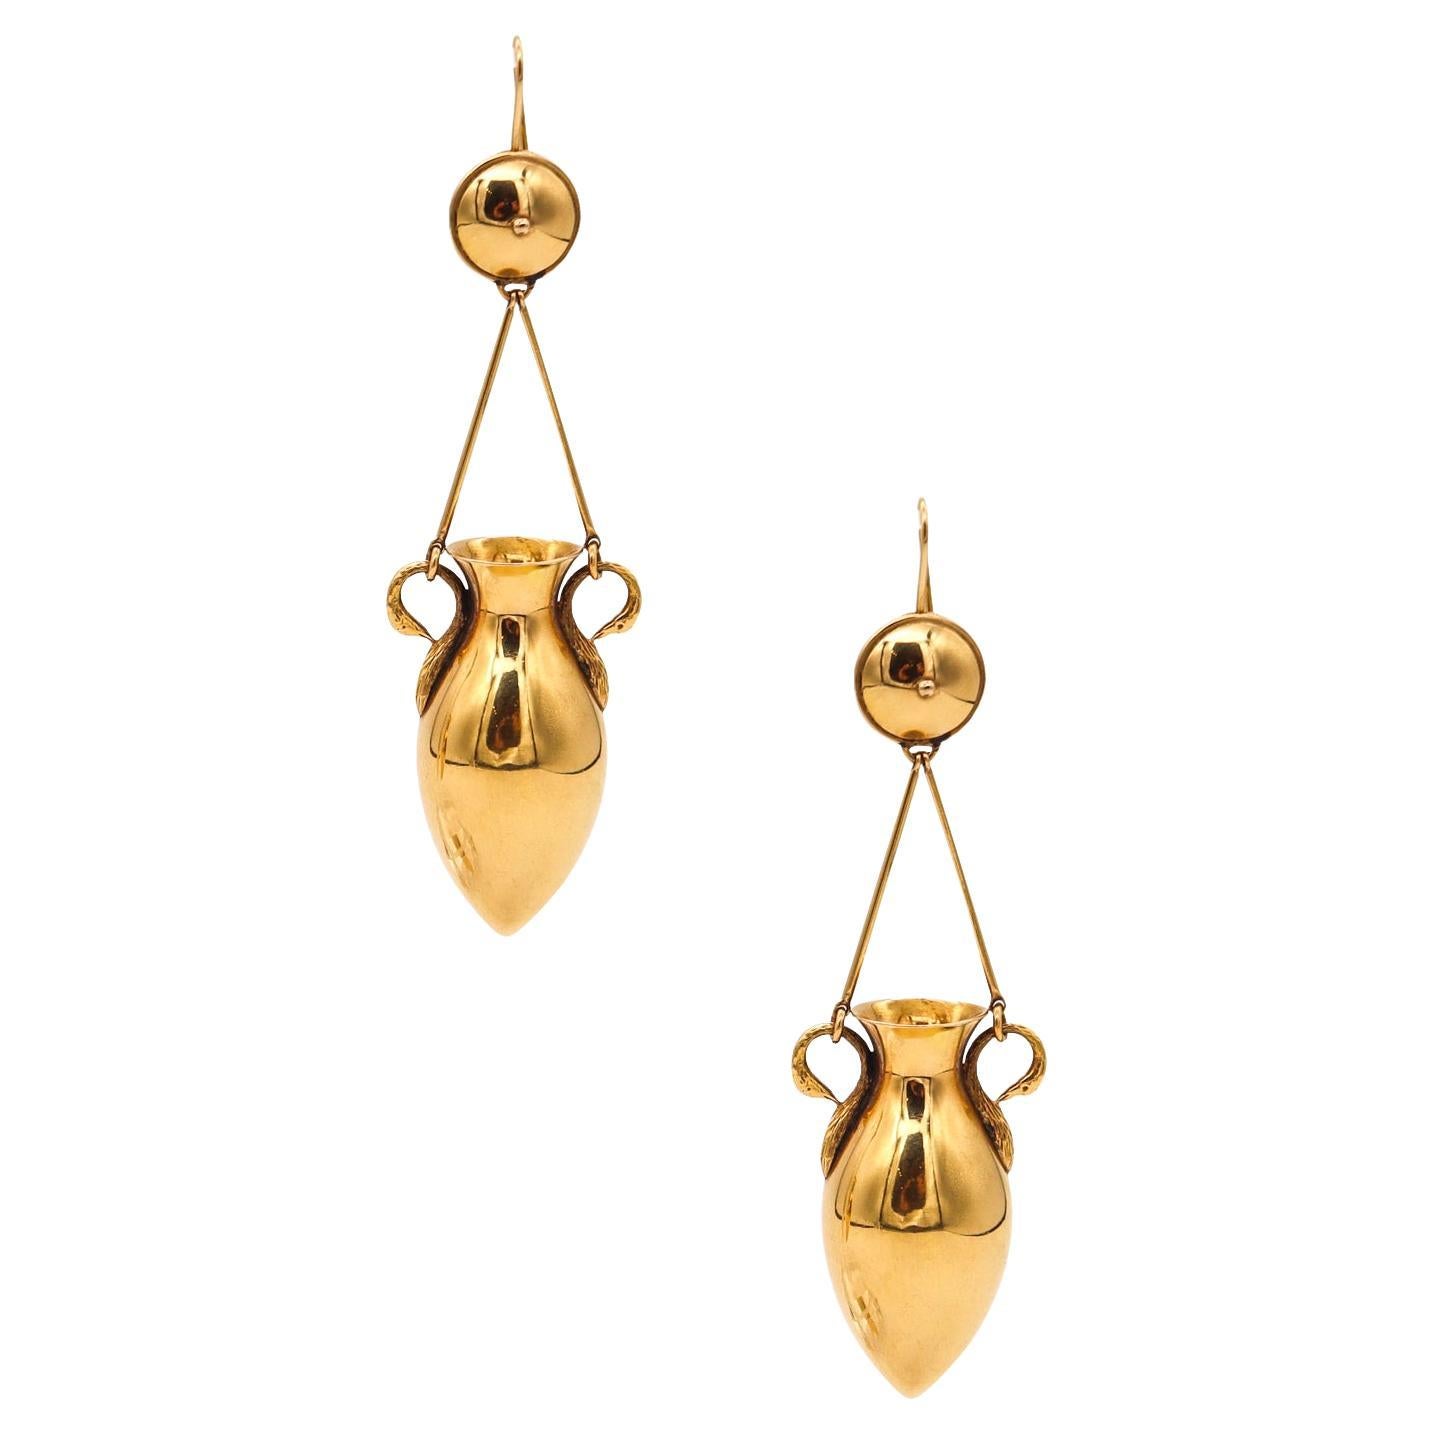 Victorian 1880 Etruscan Revival Classic Amphoras Drop Earrings 18 Kt Yellow Gold